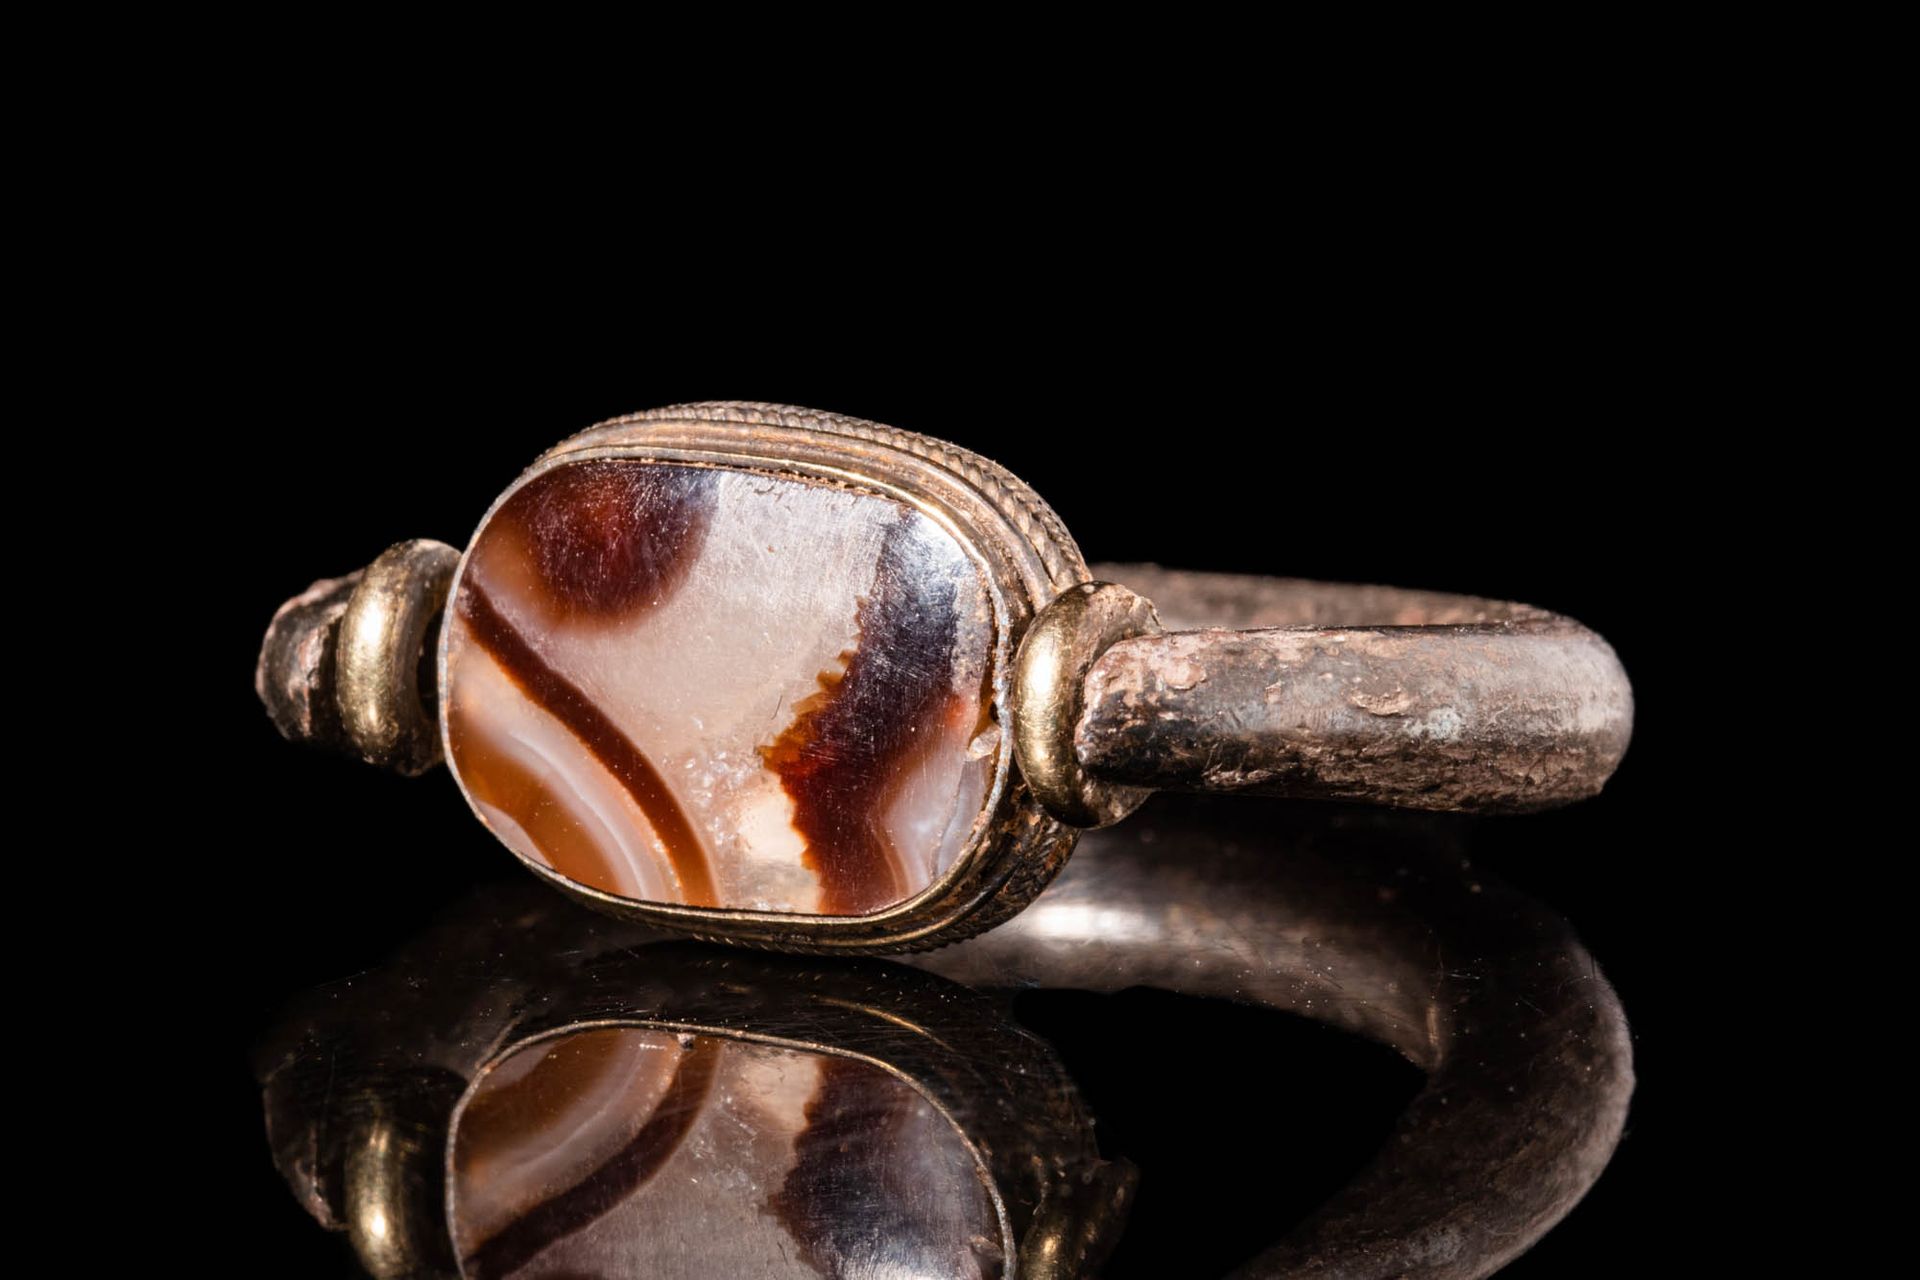 EGYPTIAN SILVER FINGER RING WITH AGATE BEZEL Nuovo Regno, ca. 1550 - 1069 A.C.
A&hellip;